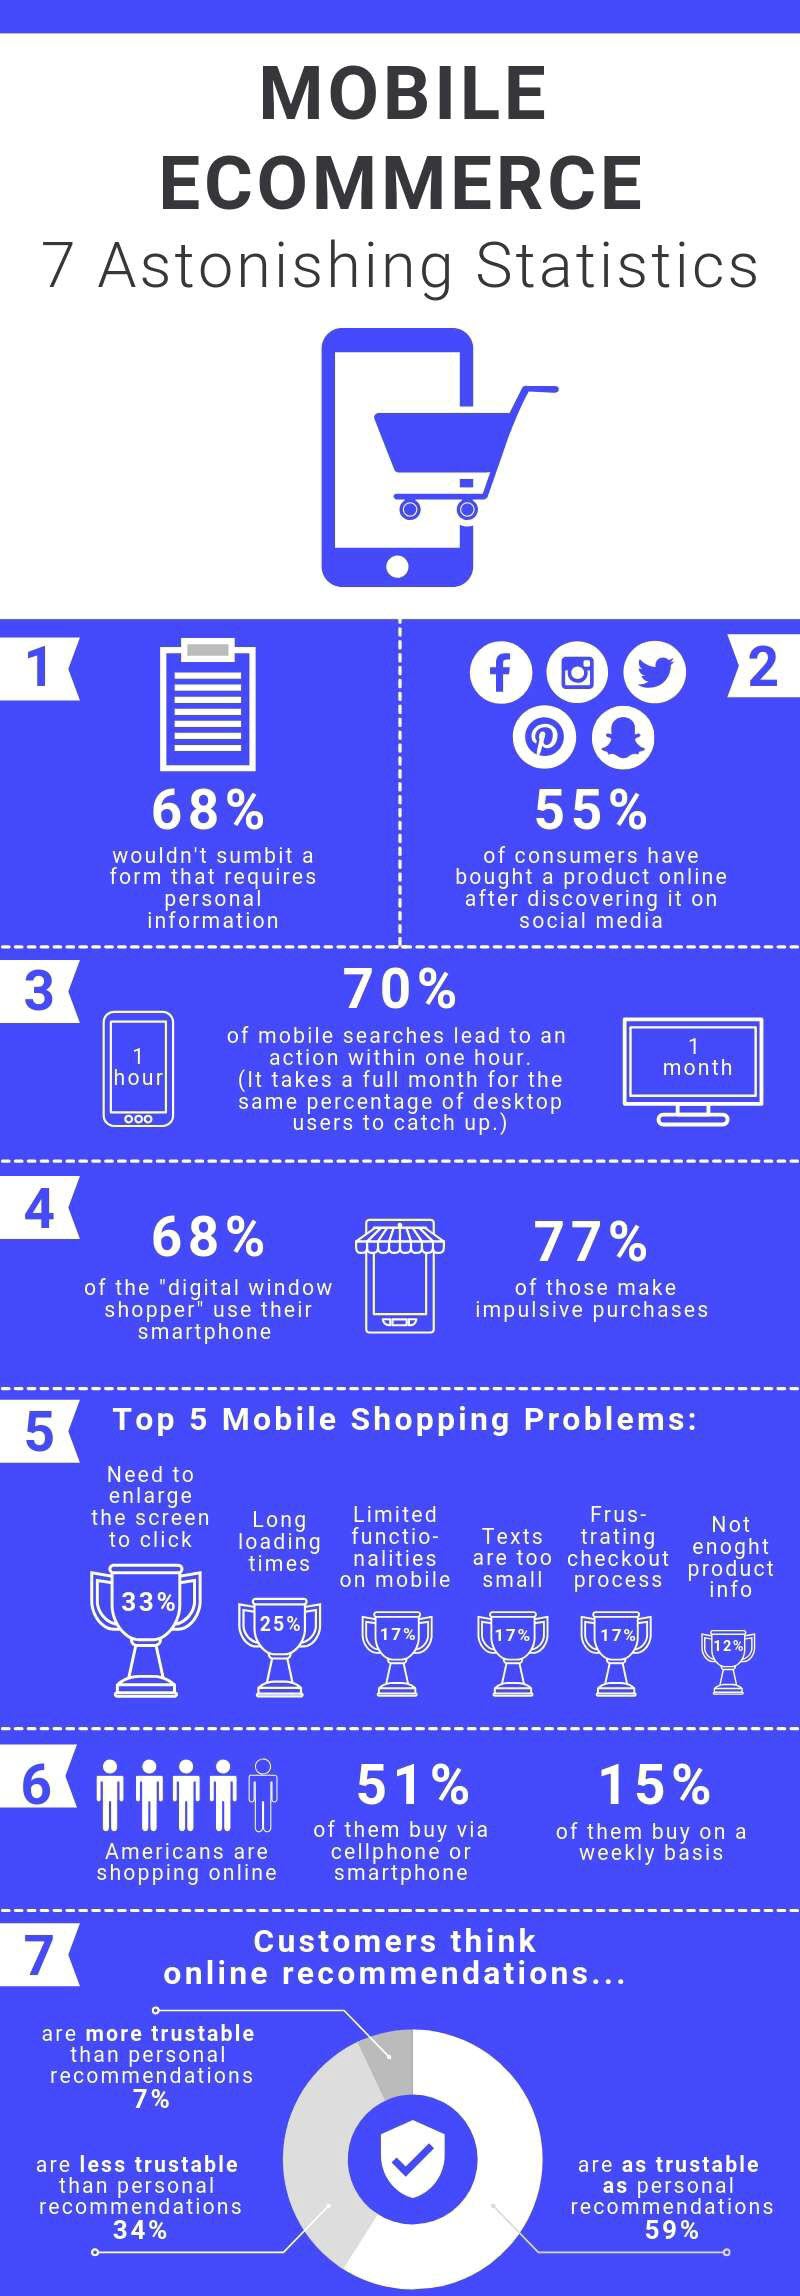 11. Mobile Ecommerce-1